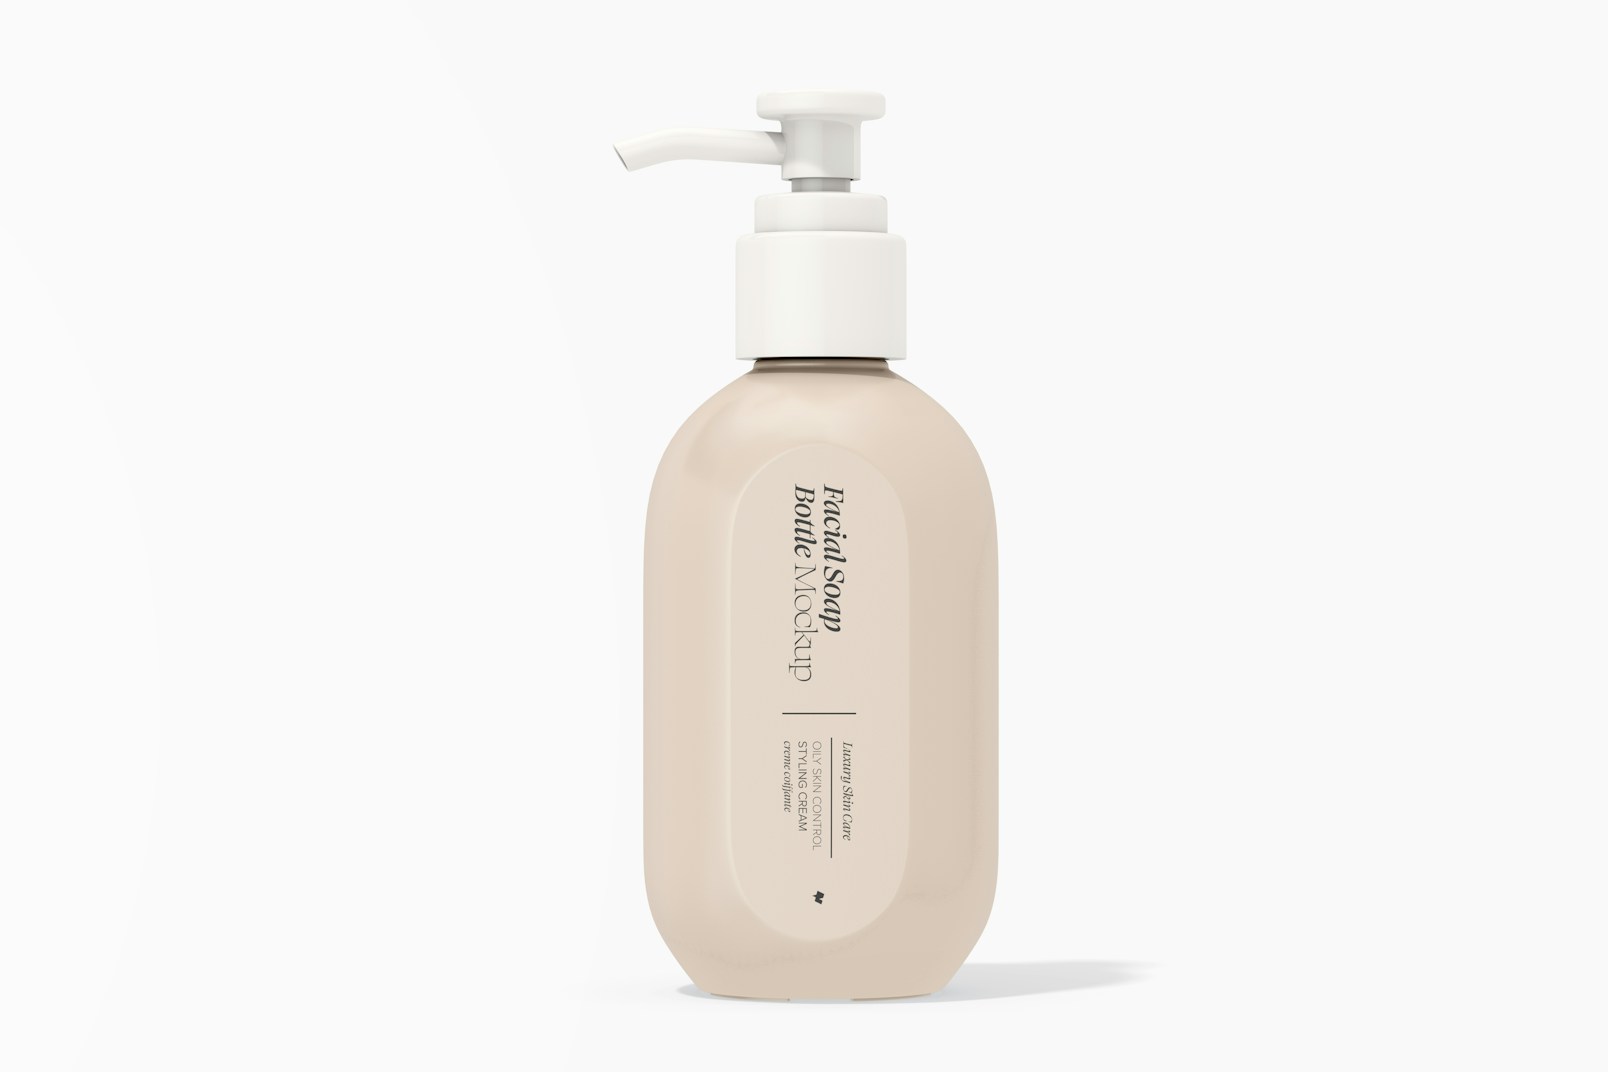 Facial Soap Bottle with Pump Container Mockup, Leaned